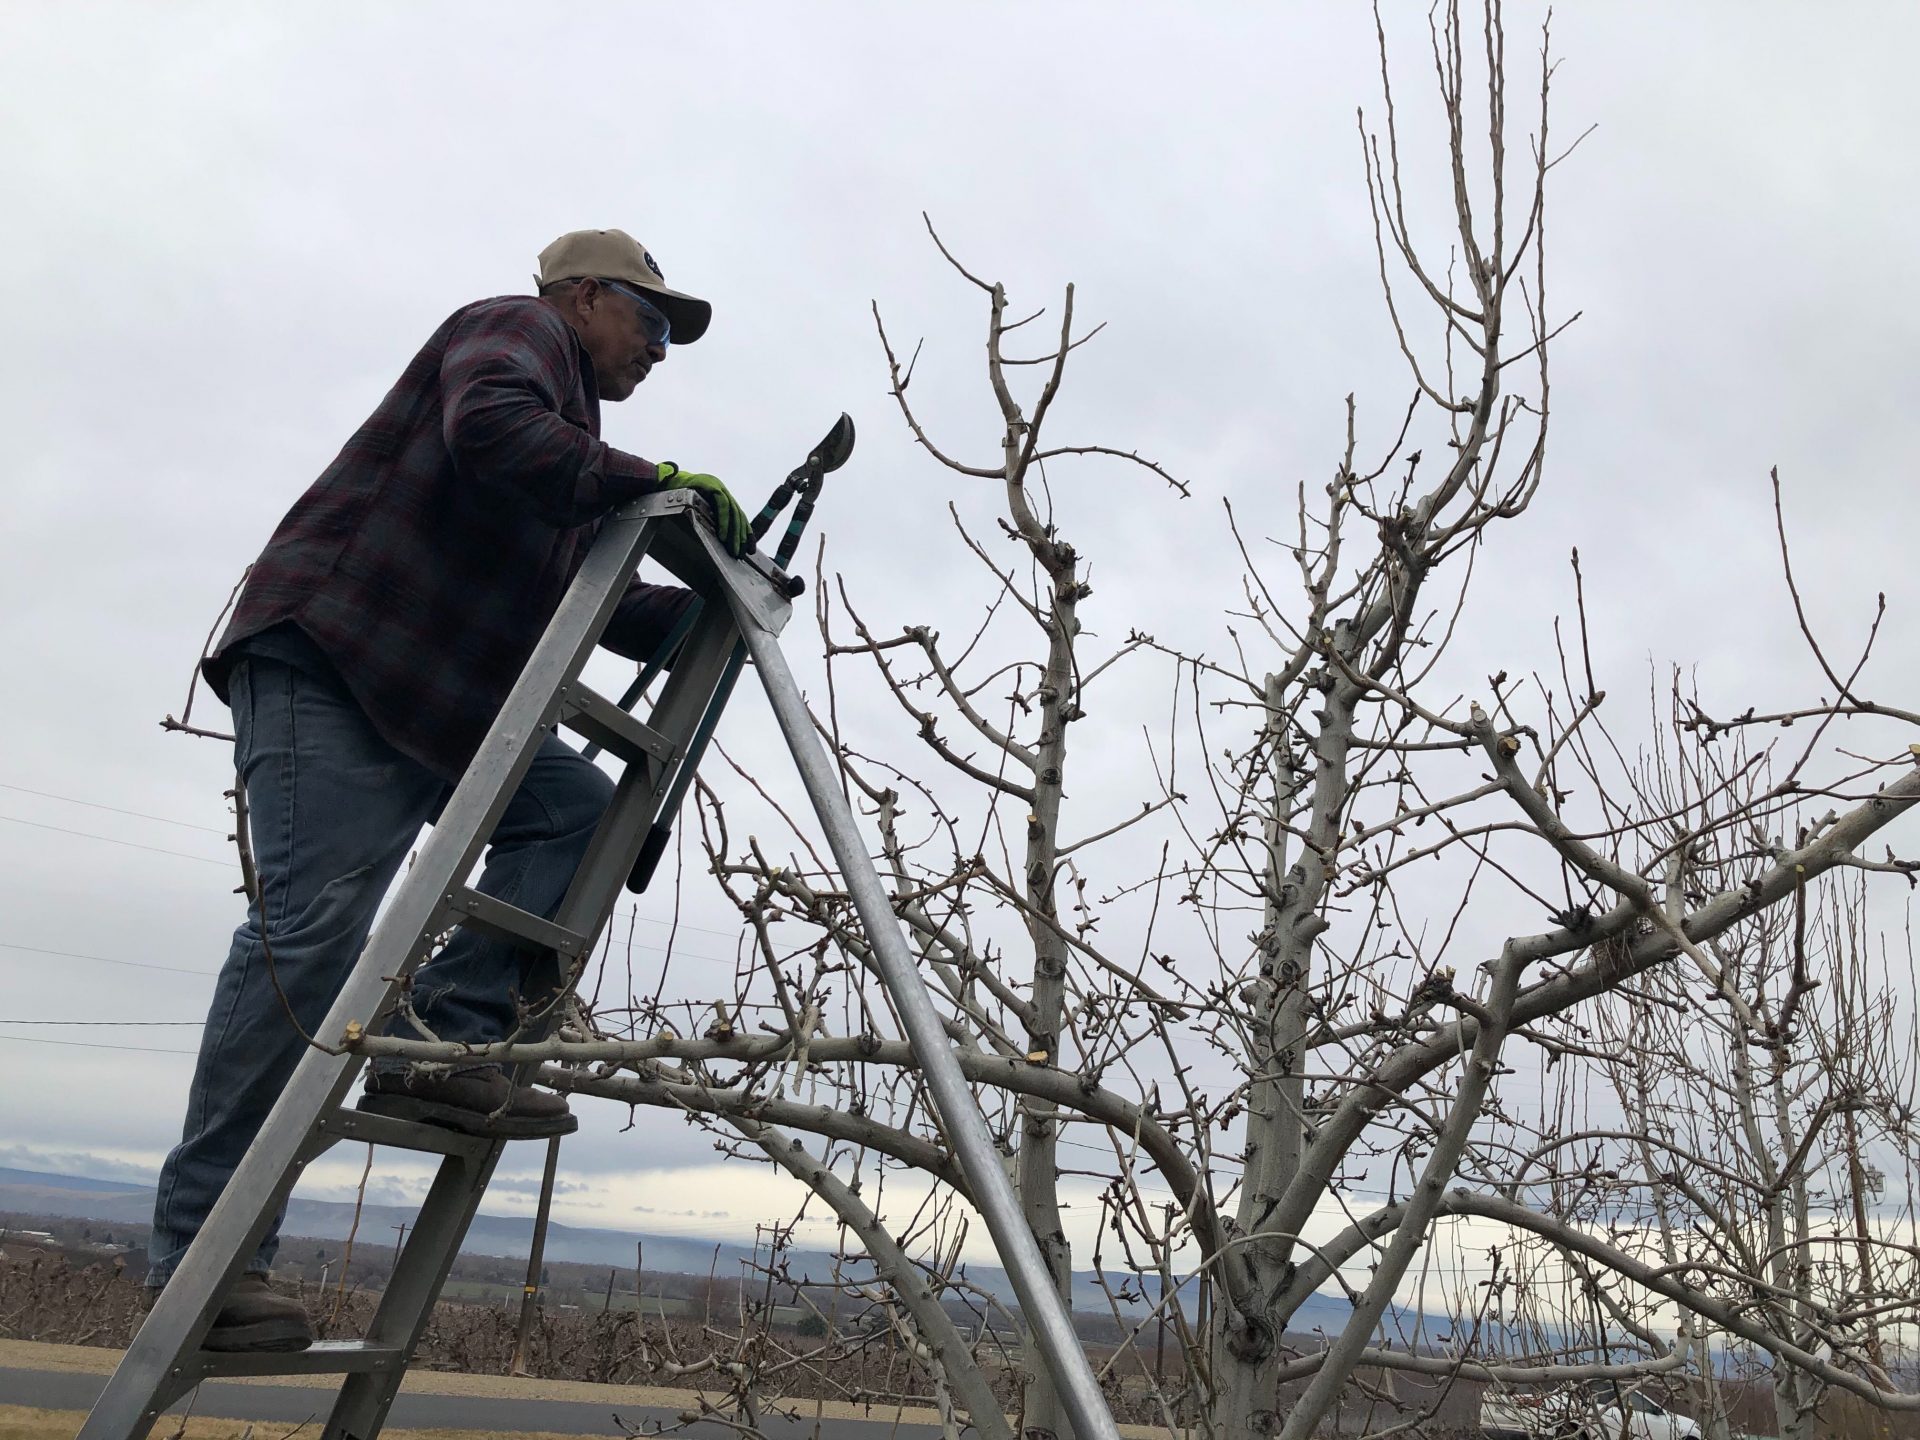 Juan Garcia, 61, of Toppenish, Wash., prunes a pear tree outside of Zillah. Crews are quickly preparing for spring in the Northwest’s orchards, but owners worry there might not be a profitable market for their on-the-way fruit like sweet cherries.